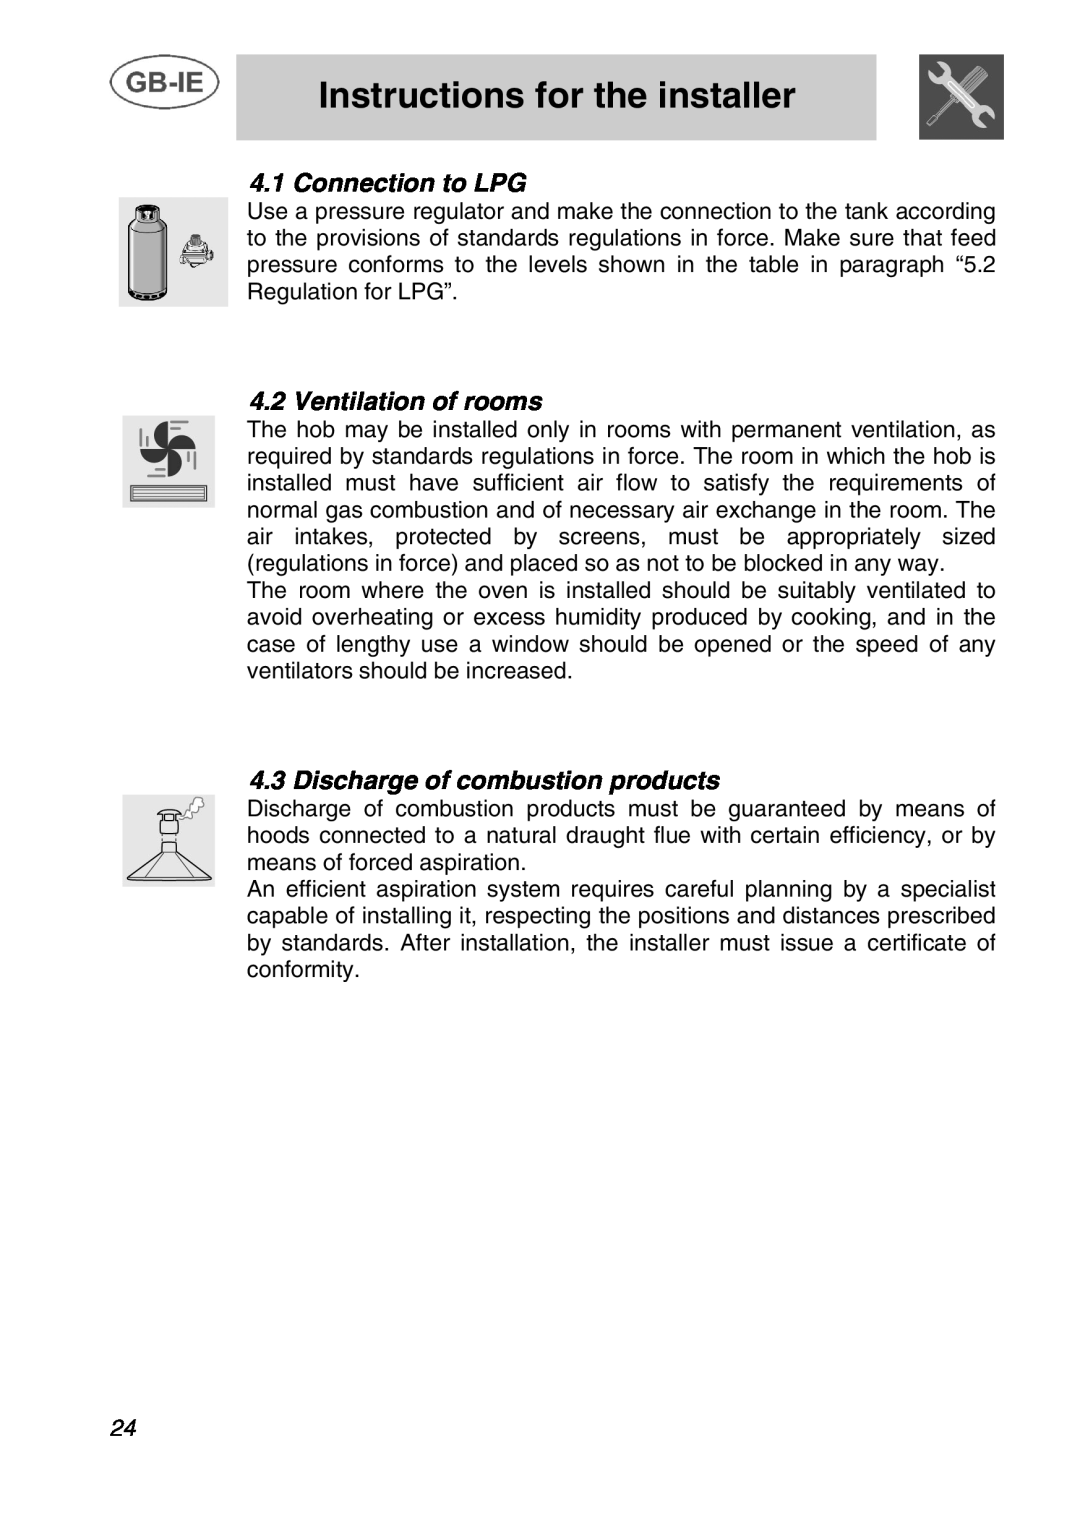 Smeg T2740N1NL Connection to LPG, Ventilation of rooms, Discharge of combustion products, Instructions for the installer 